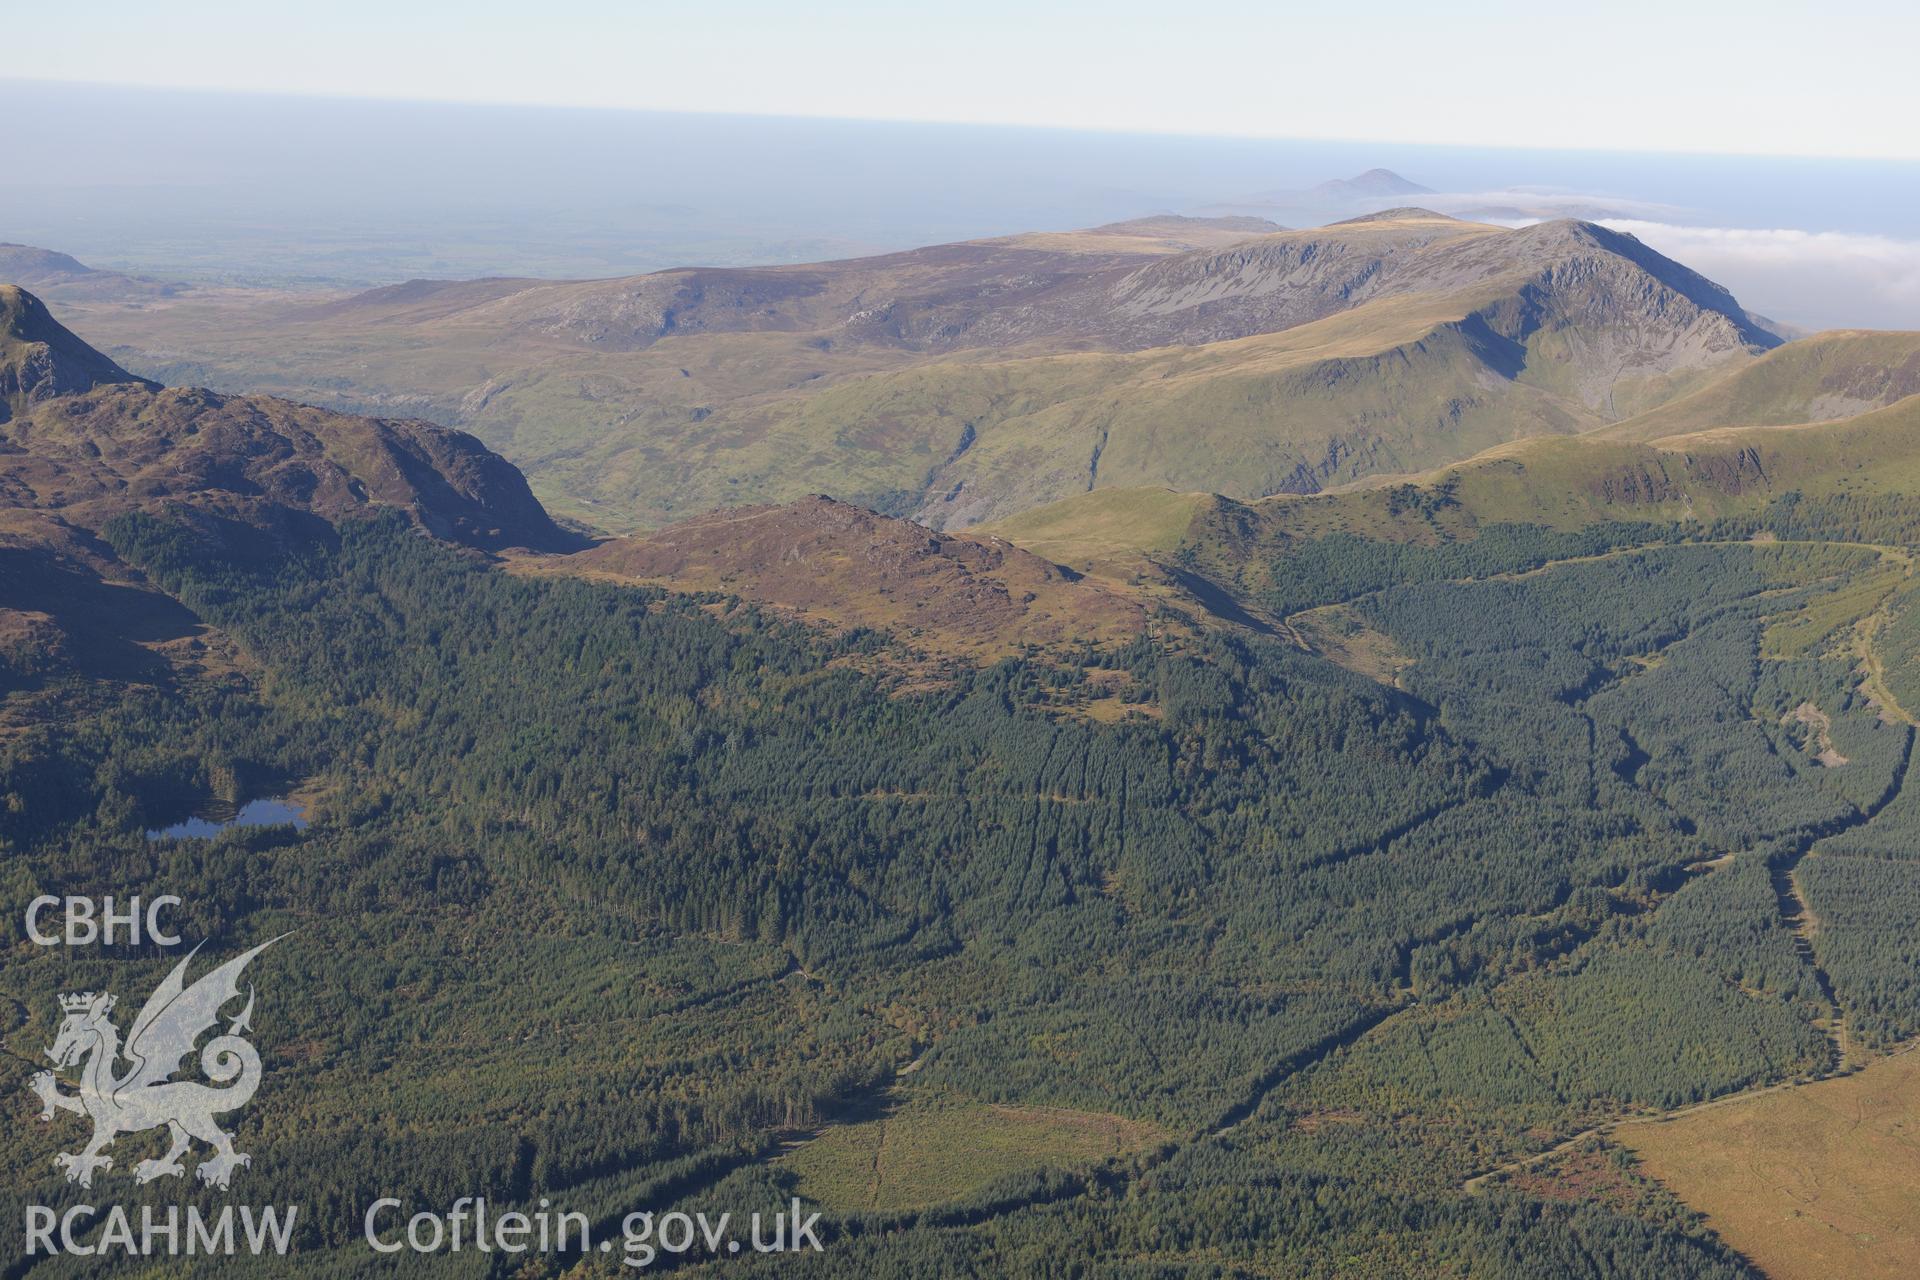 Moel Lefn, surrounded by Beddgelert Forest with Moel Hebog beyond. Oblique aerial photograph taken during the Royal Commission's programme of archaeological aerial reconnaissance by Toby Driver on 2nd October 2015.